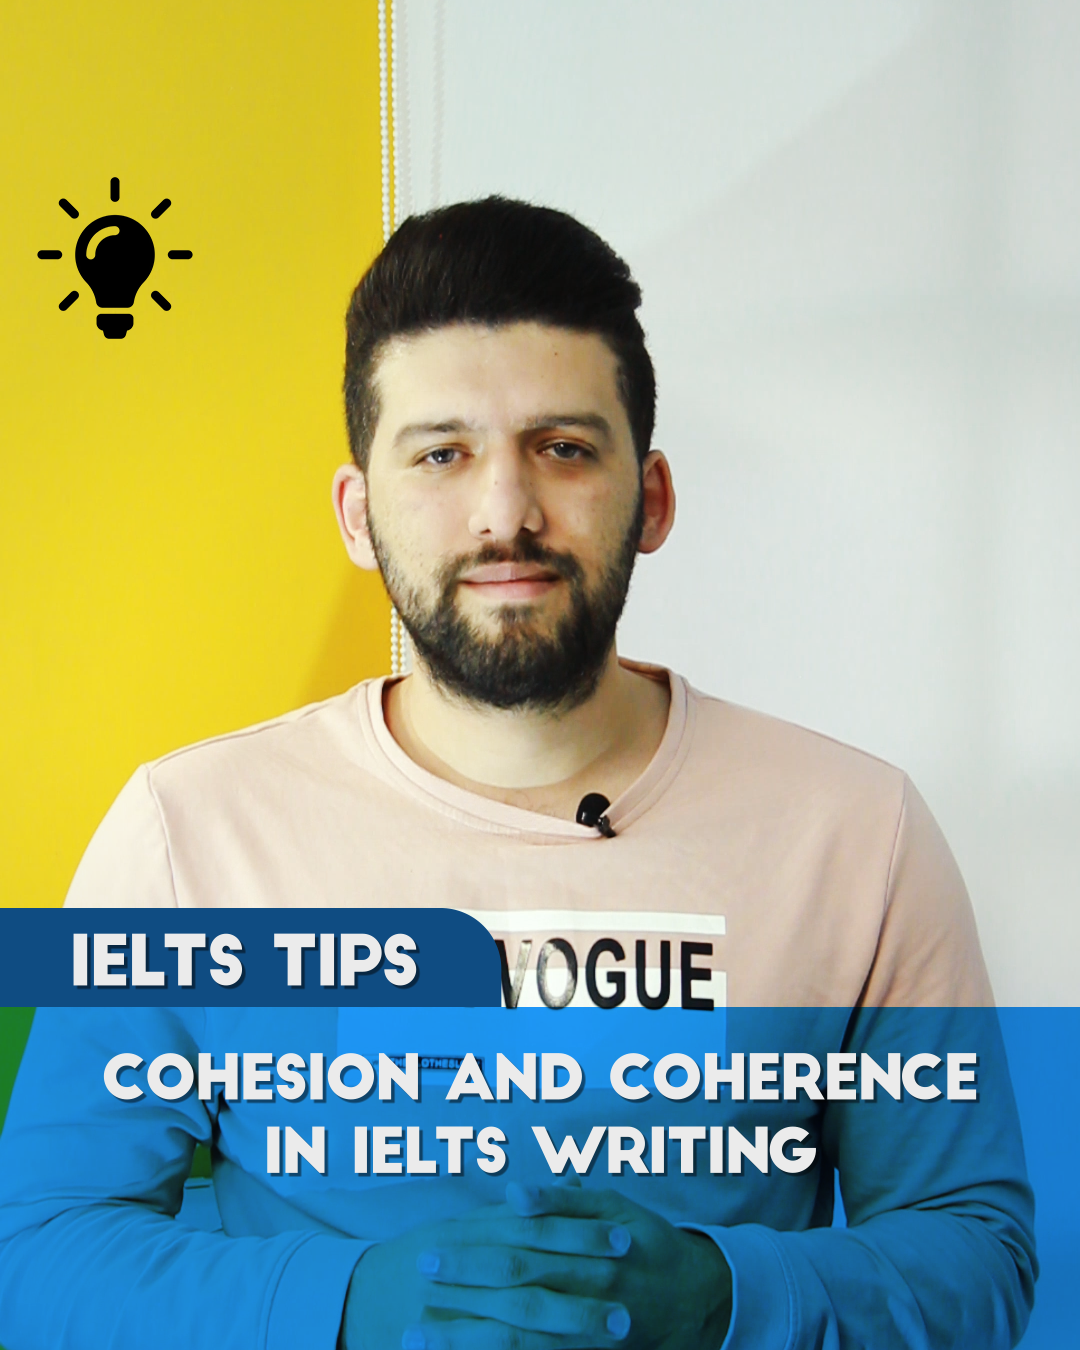 Cohesion and Coherence in IELTS Writing